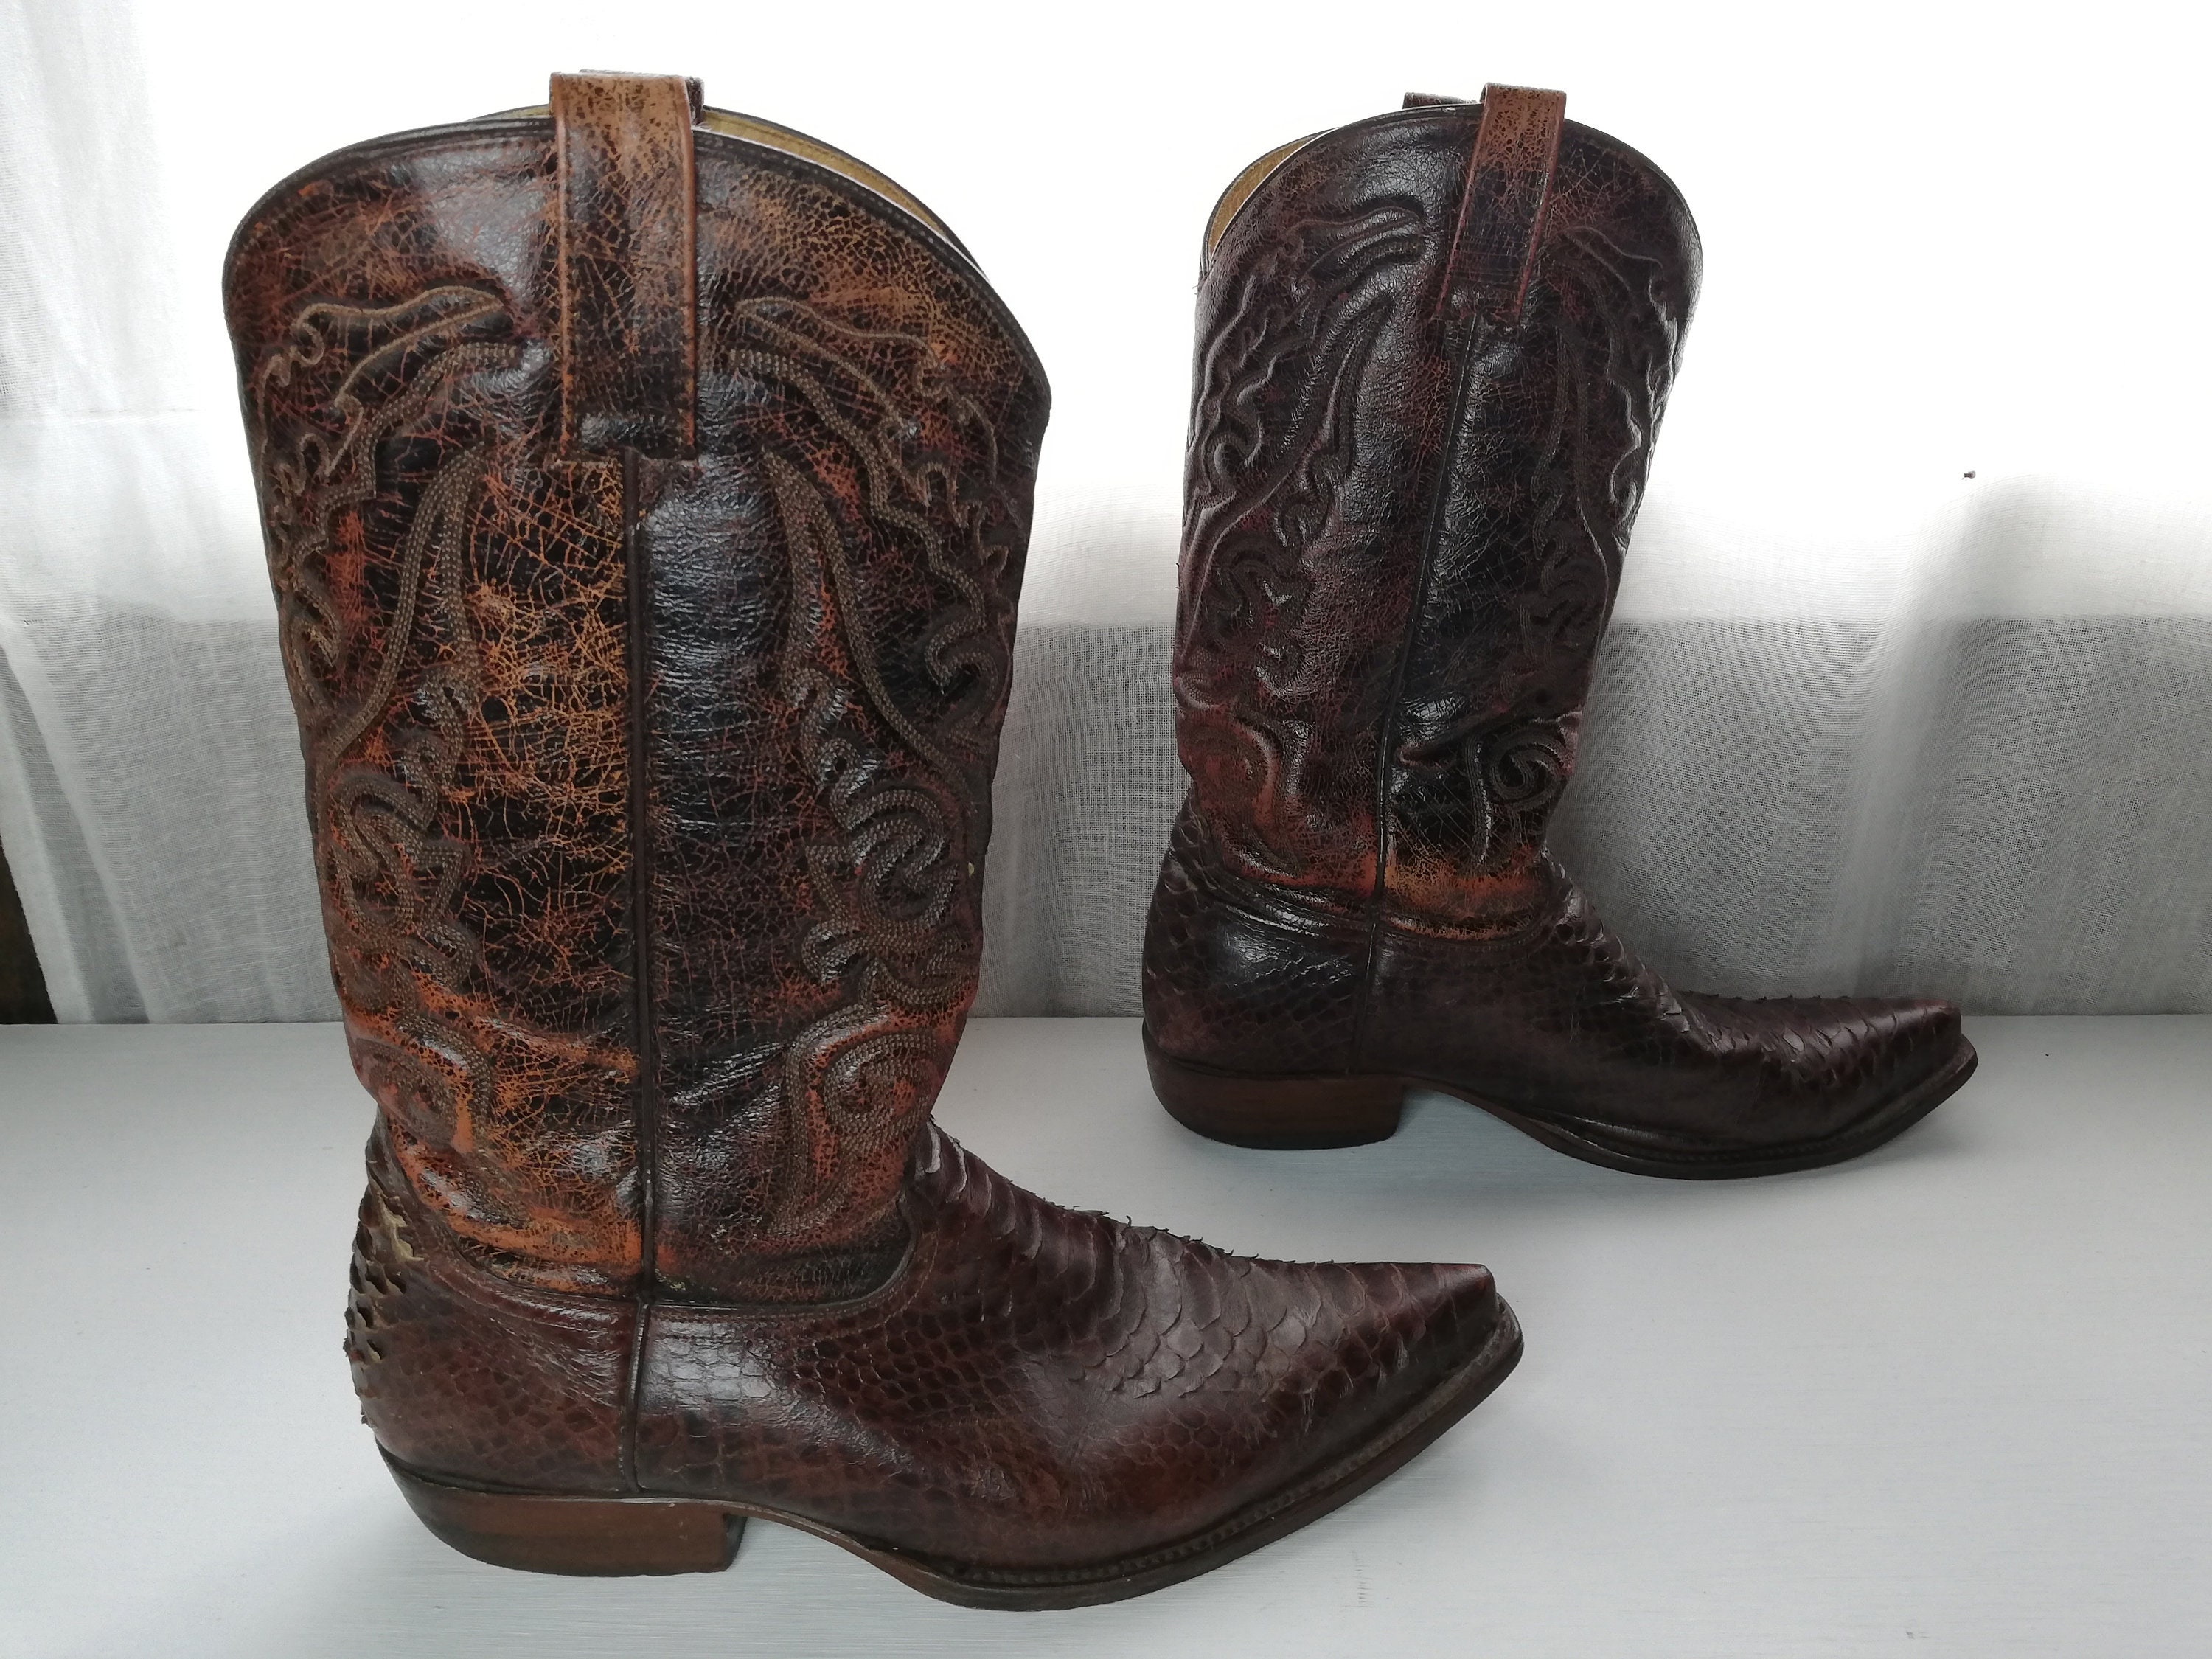 uitsterven meester geweer Buffalo Cowboy Boots Western Boots Size 43 Eur 10.5 US - Etsy